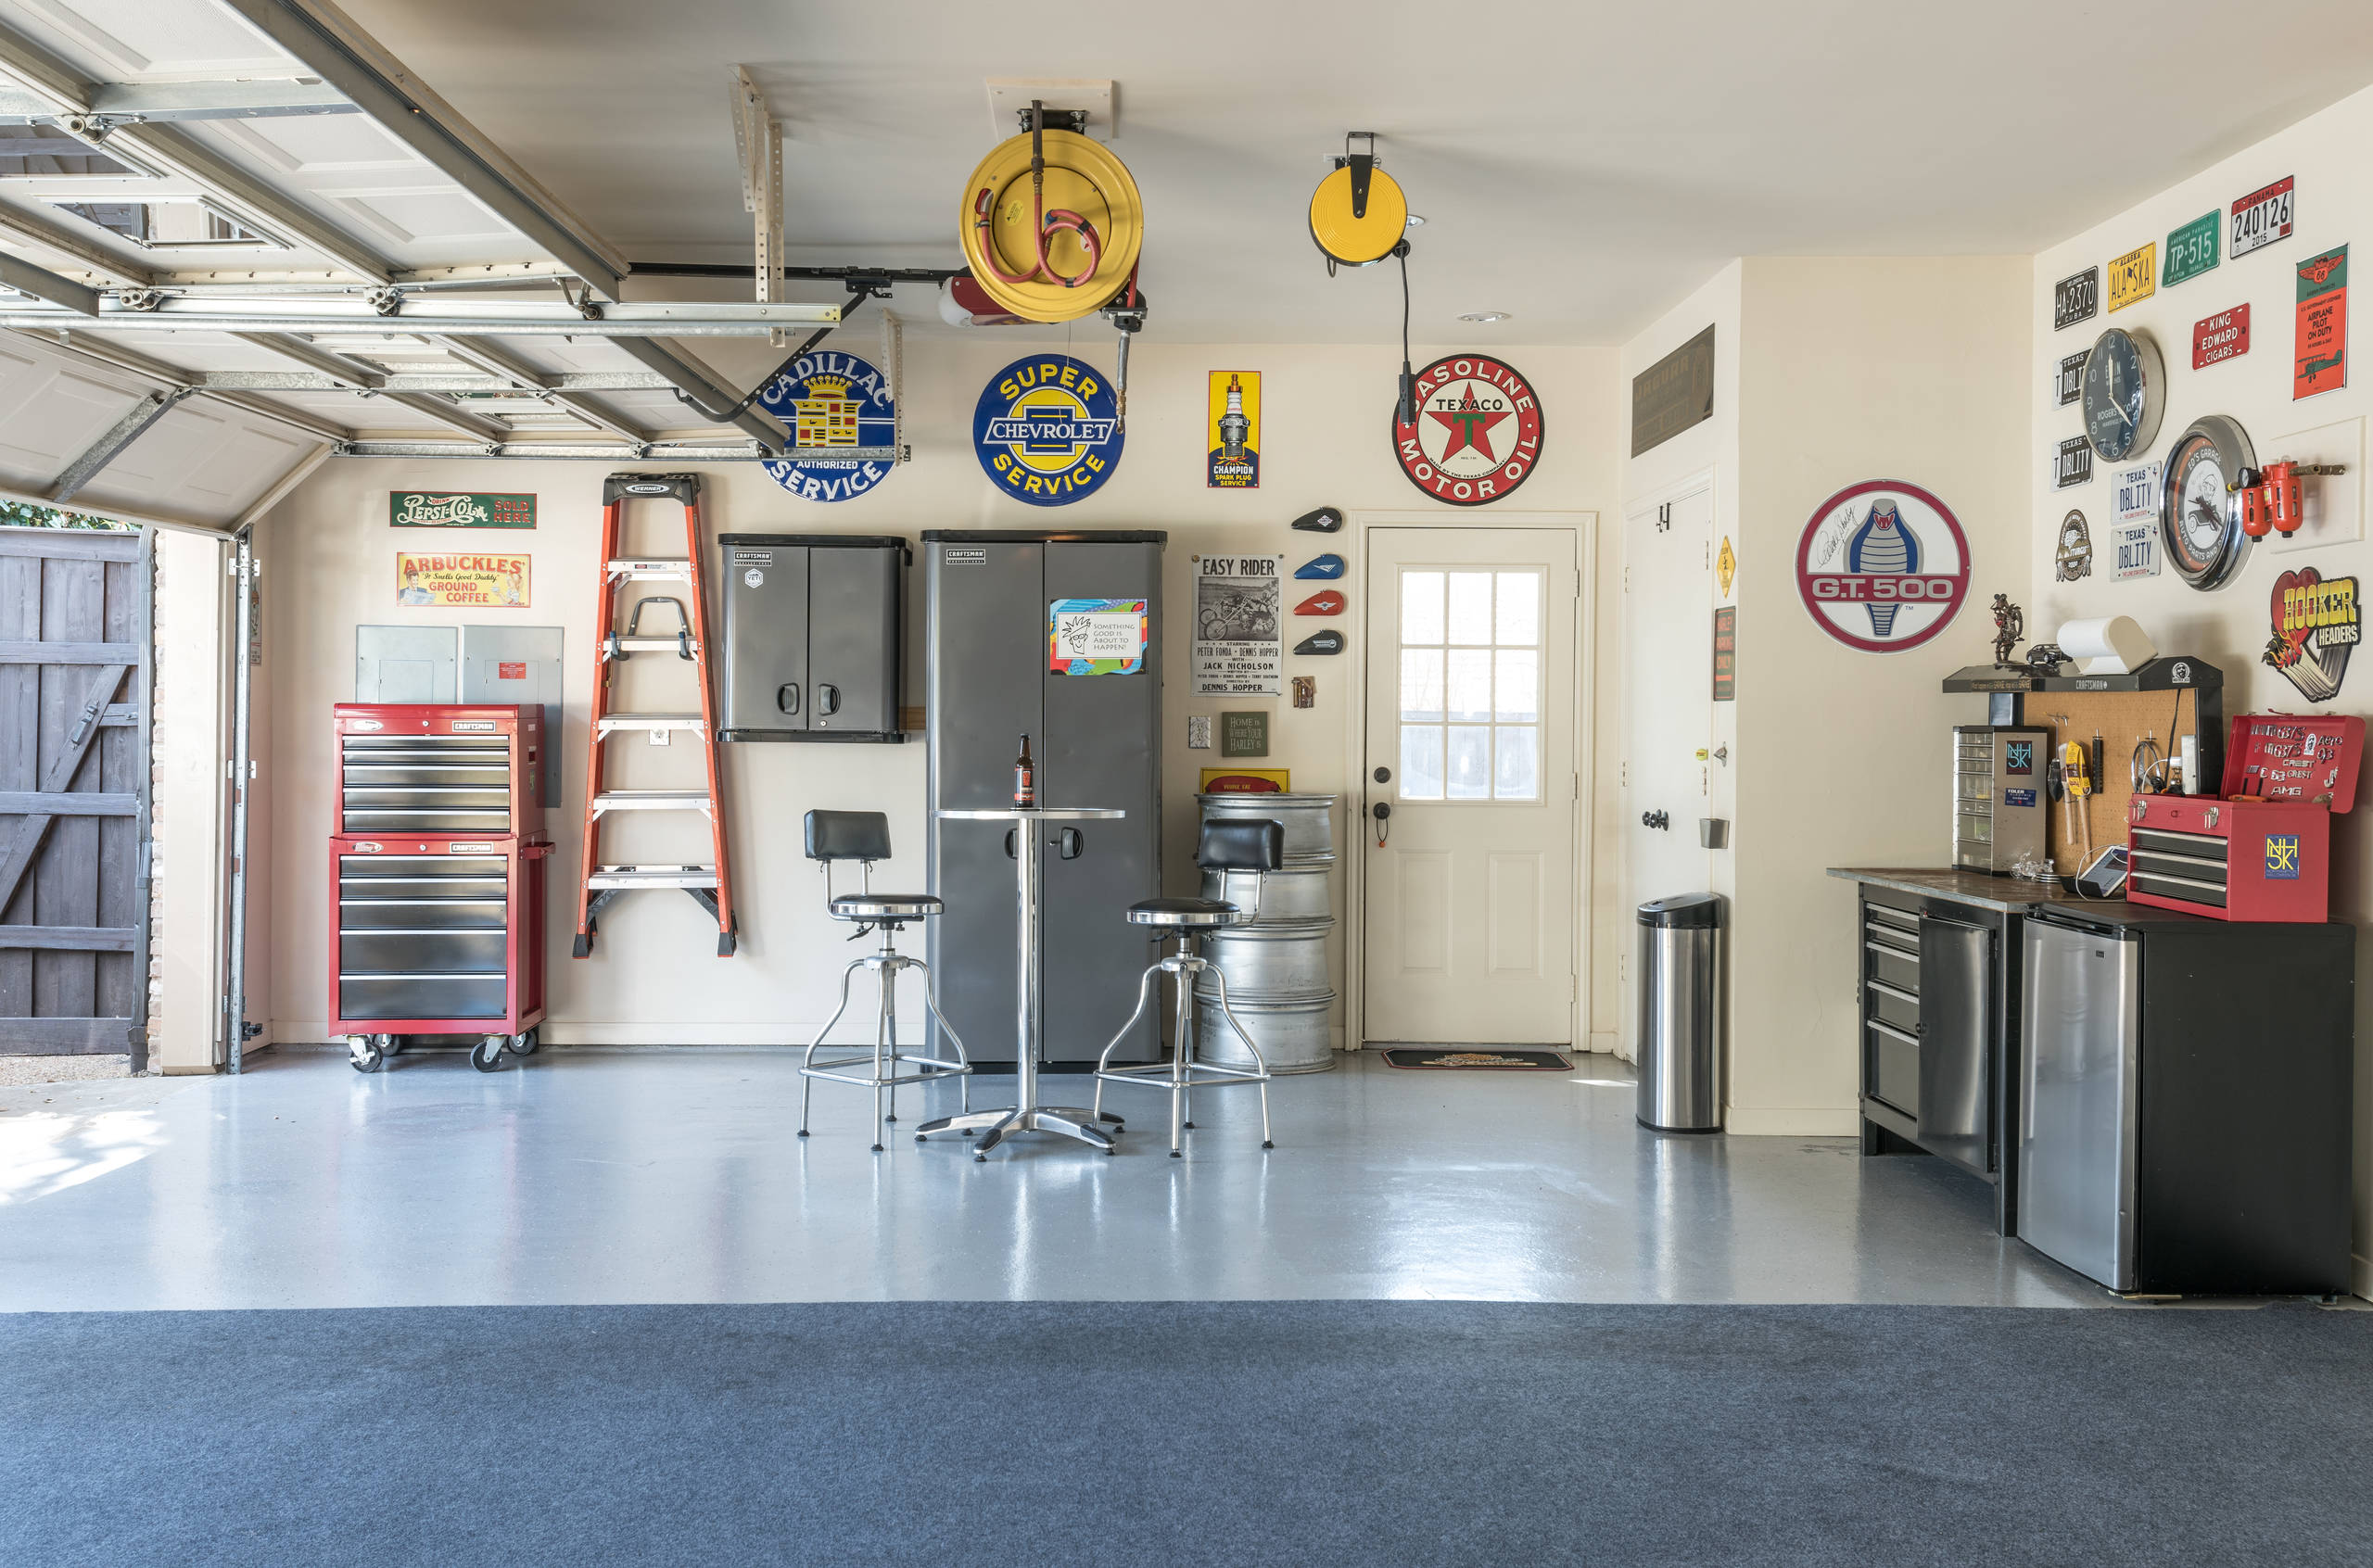 10 Creative Garage Work Station Ideas You Need to See!